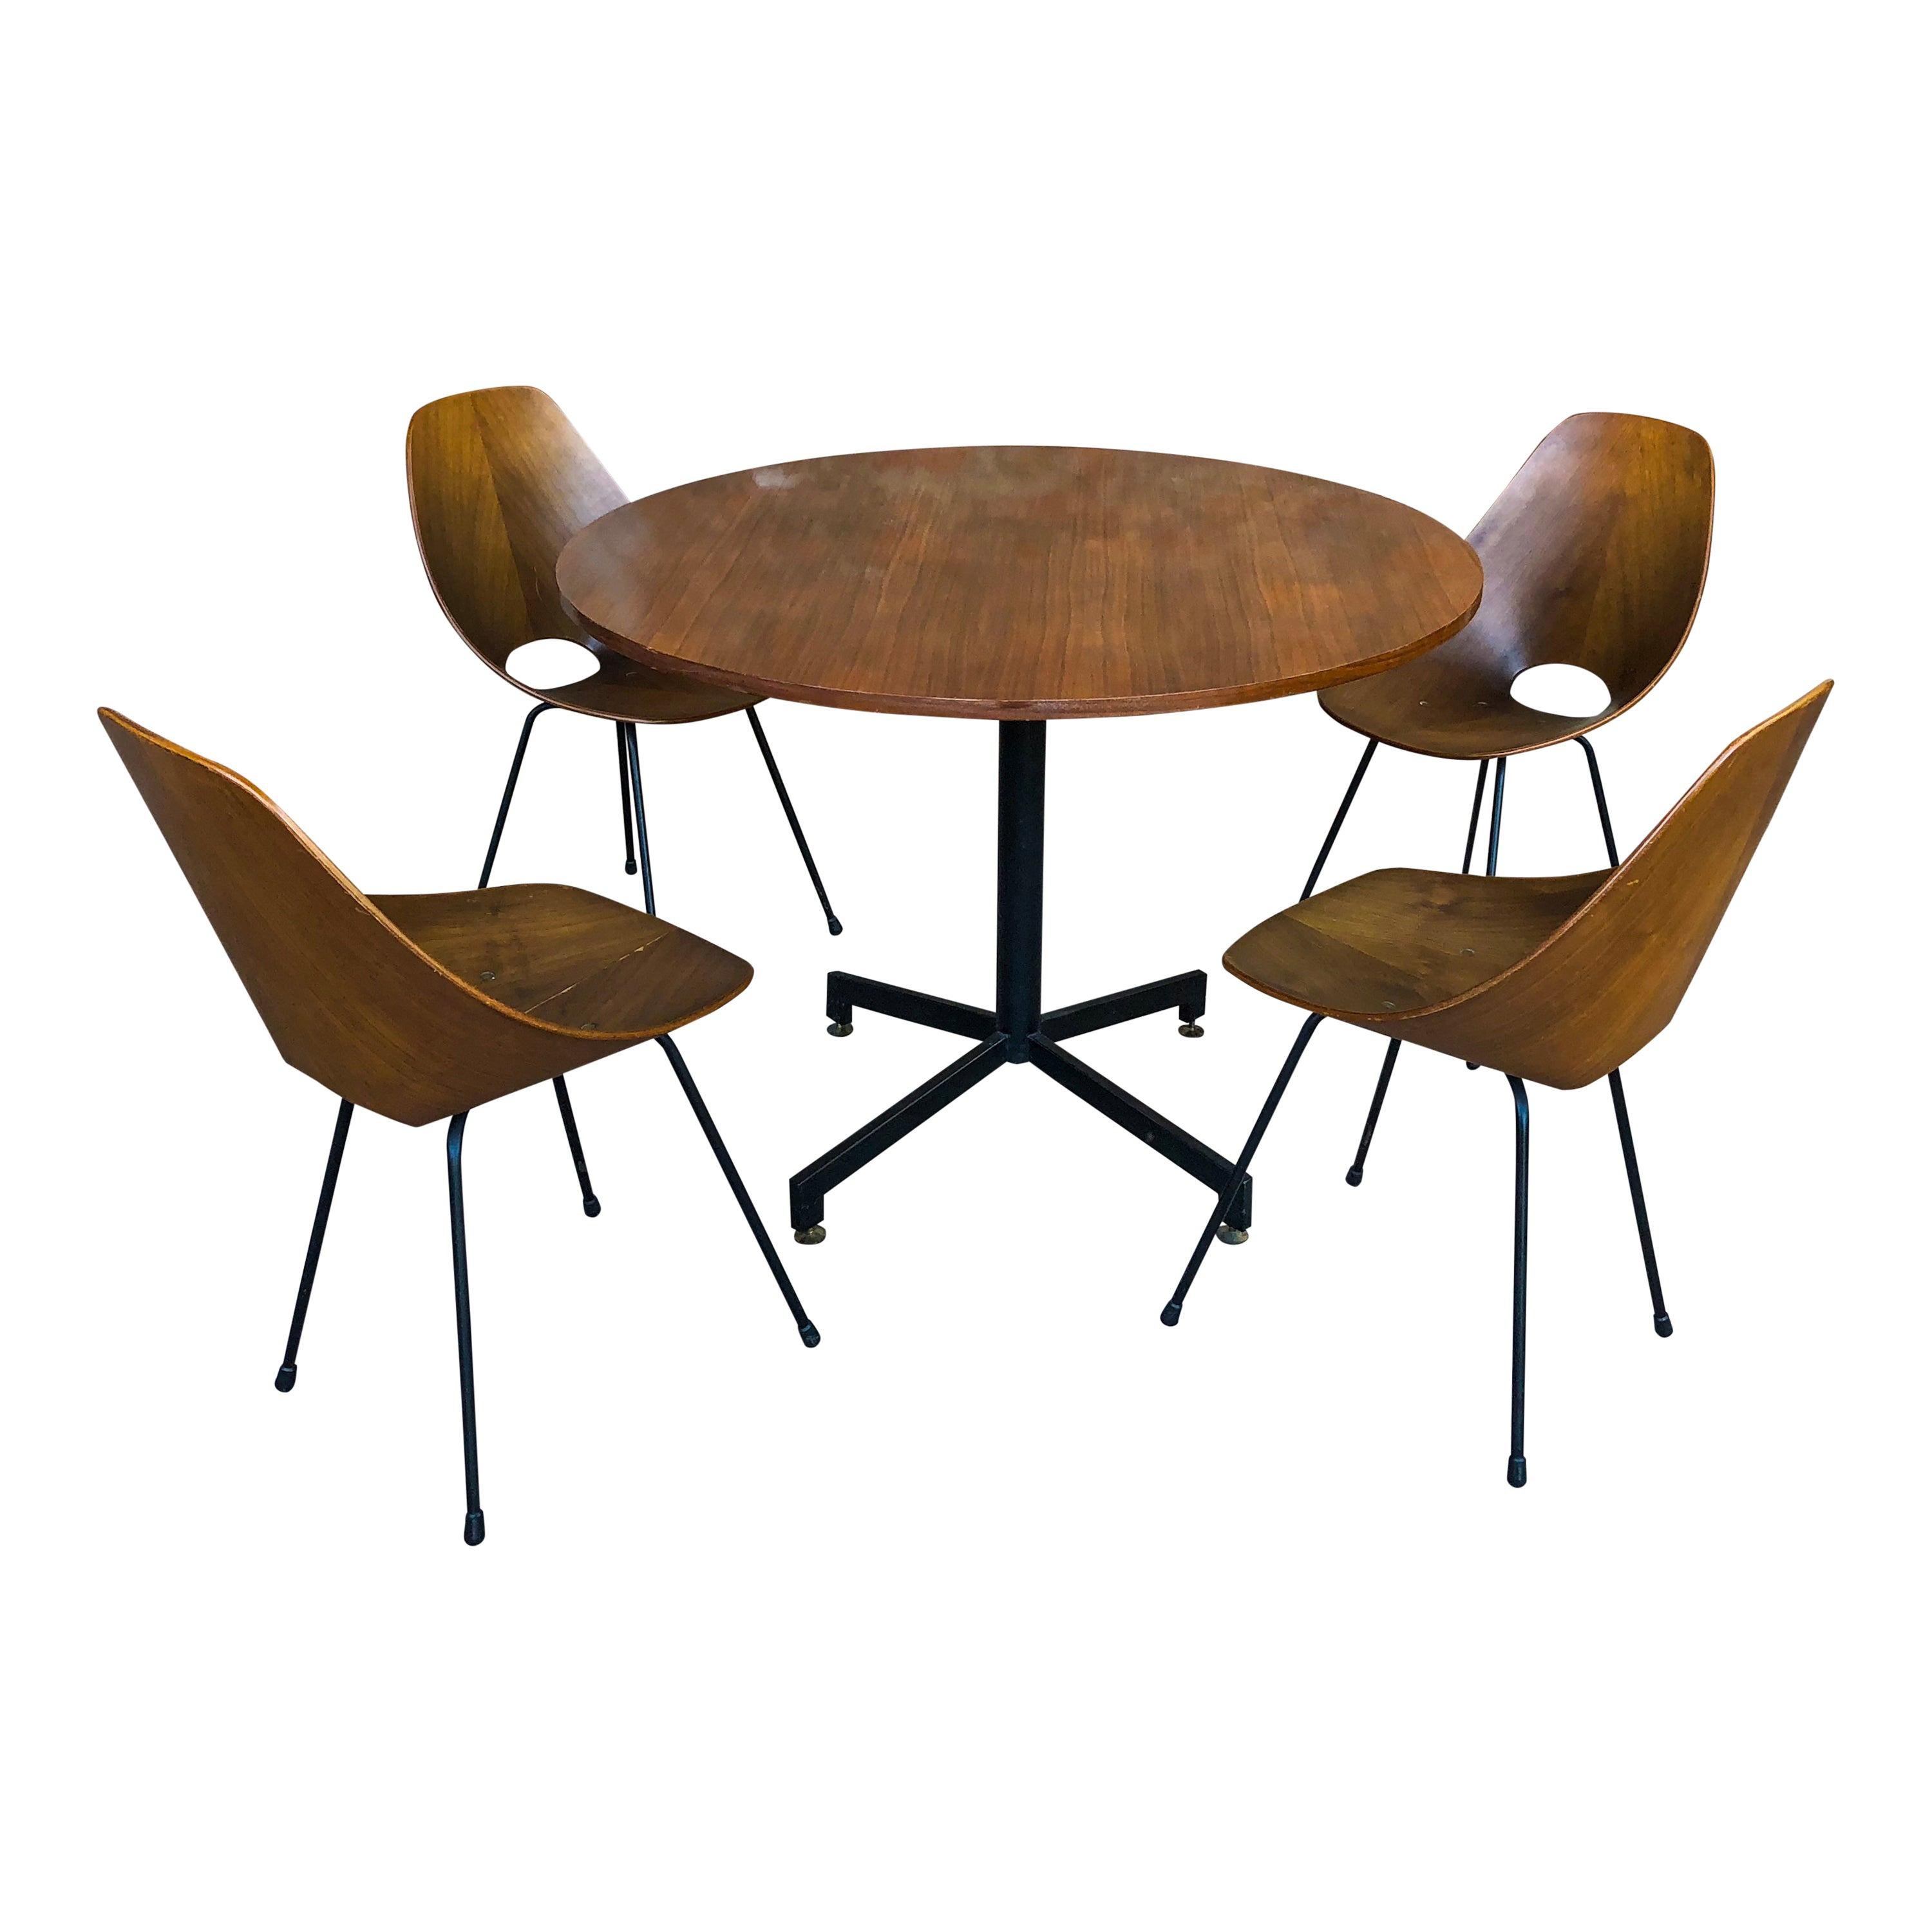 Vittorio Nobili Midcentury Teak Medea Dining Room Set with Table & Chairs, 1956 For Sale